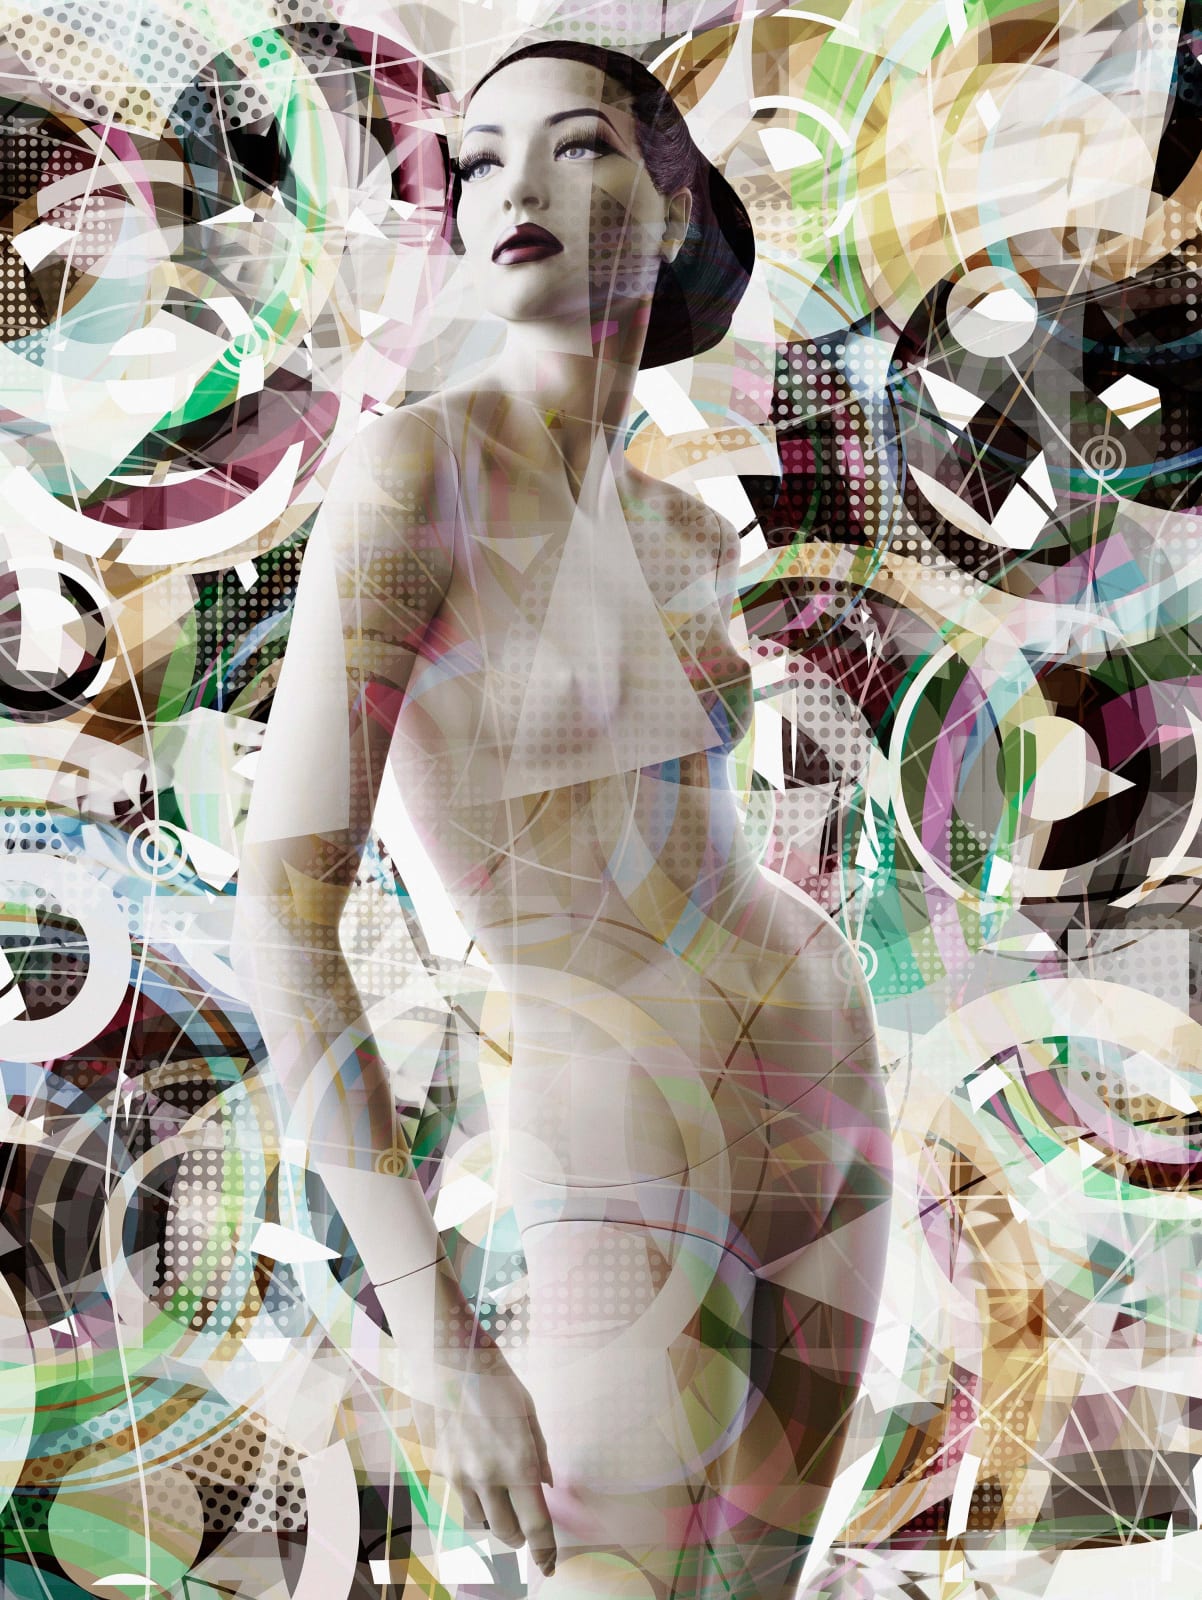 Valérie Belin Electra Super Models nude mannequin with multiple exposure image with abstract shapes 